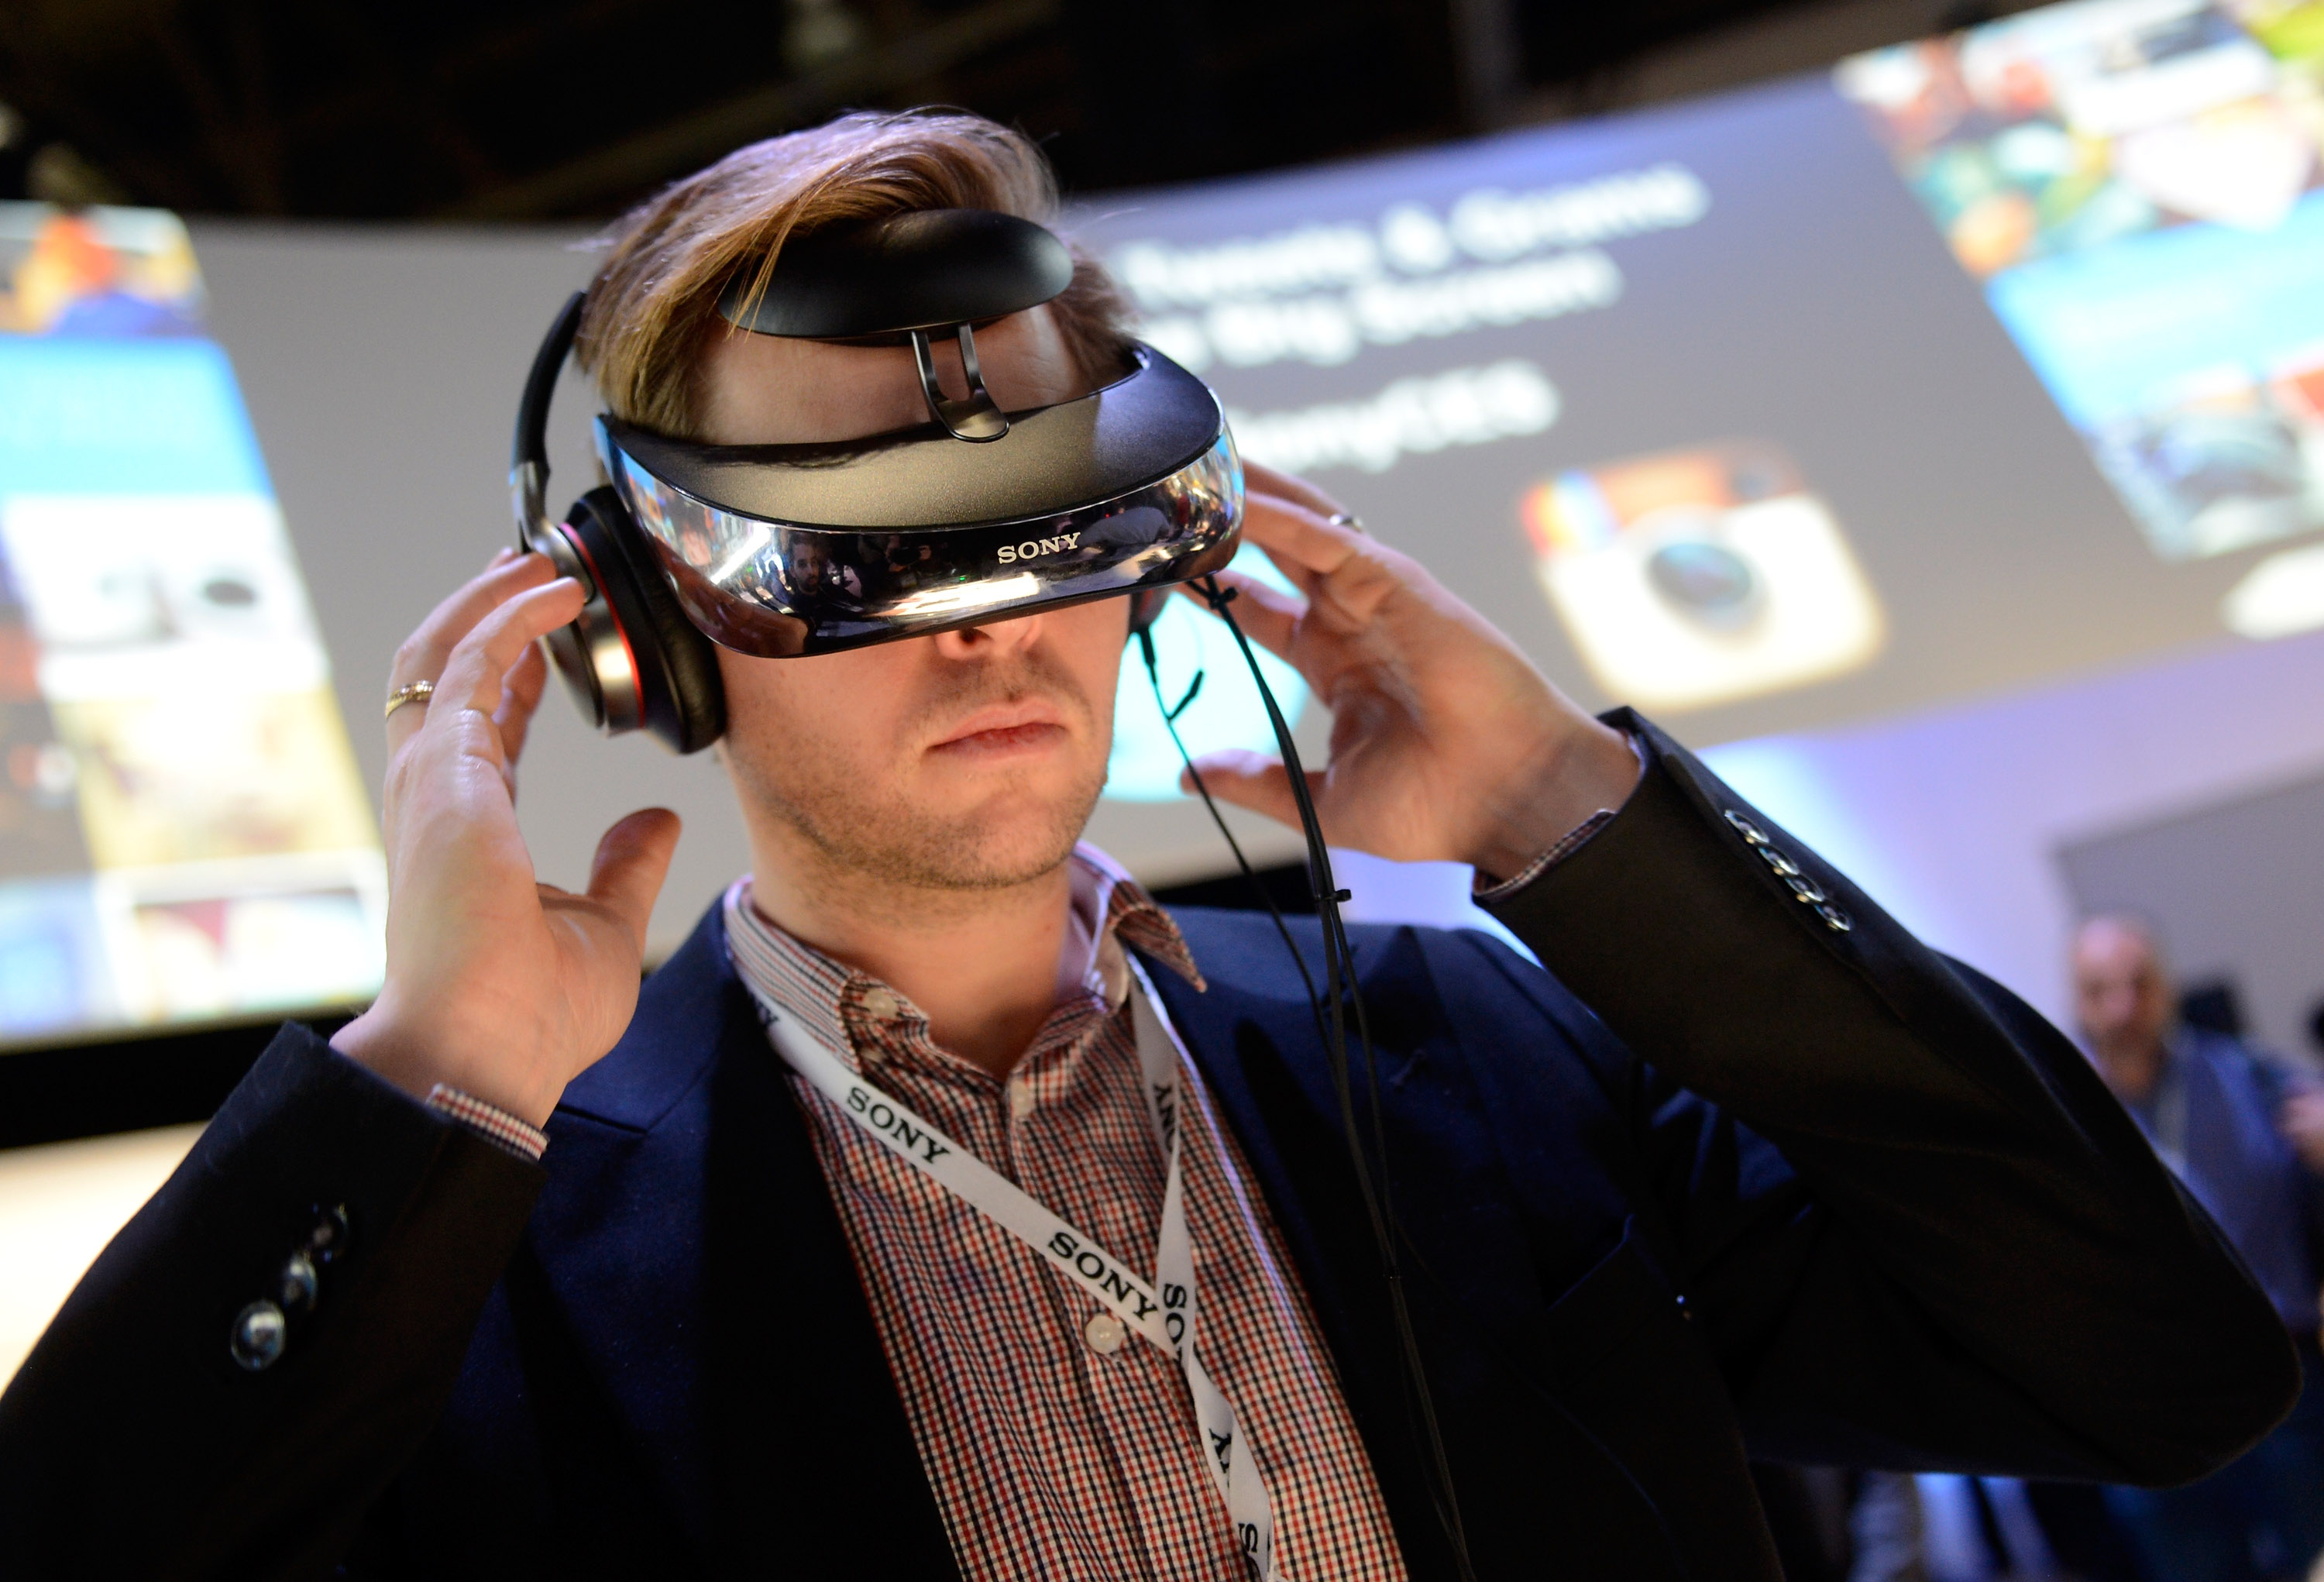 At the 2014 International CES at the Las Vegas Convention Center on January 7, 2014 in Las Vegas, Nevada. (David Becker&mdash;2014 Getty Images)